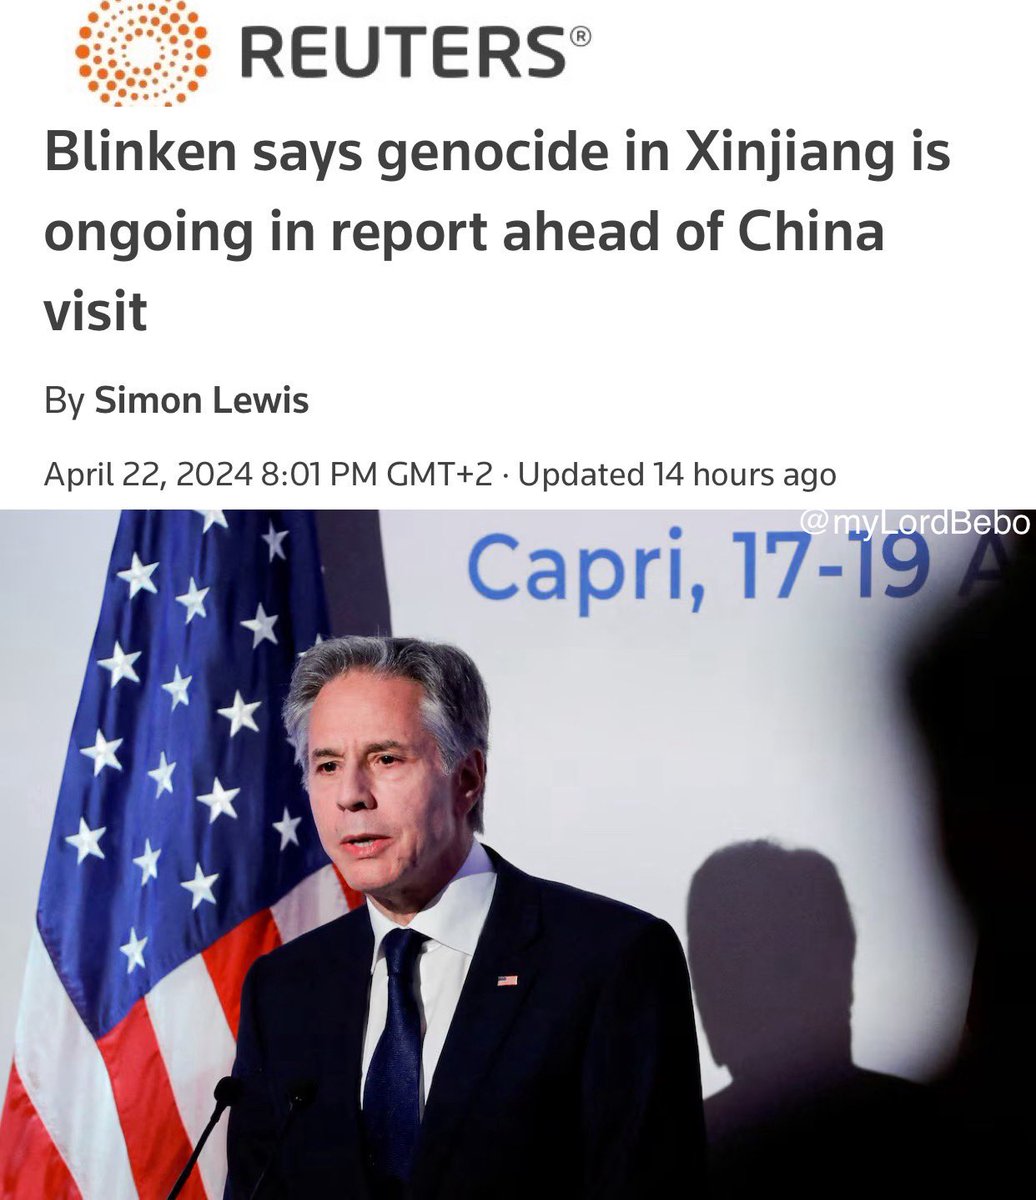 🇨🇳🇺🇸 Blinken shows peak diplomacy and emphasizes the Uyghur genocide before his China visit.

 'For example, in Xinjiang, the PRC continues to carry out genocide, crimes against humanity, forced labor, and other human rights violations against predominantly Muslim Uyghurs and